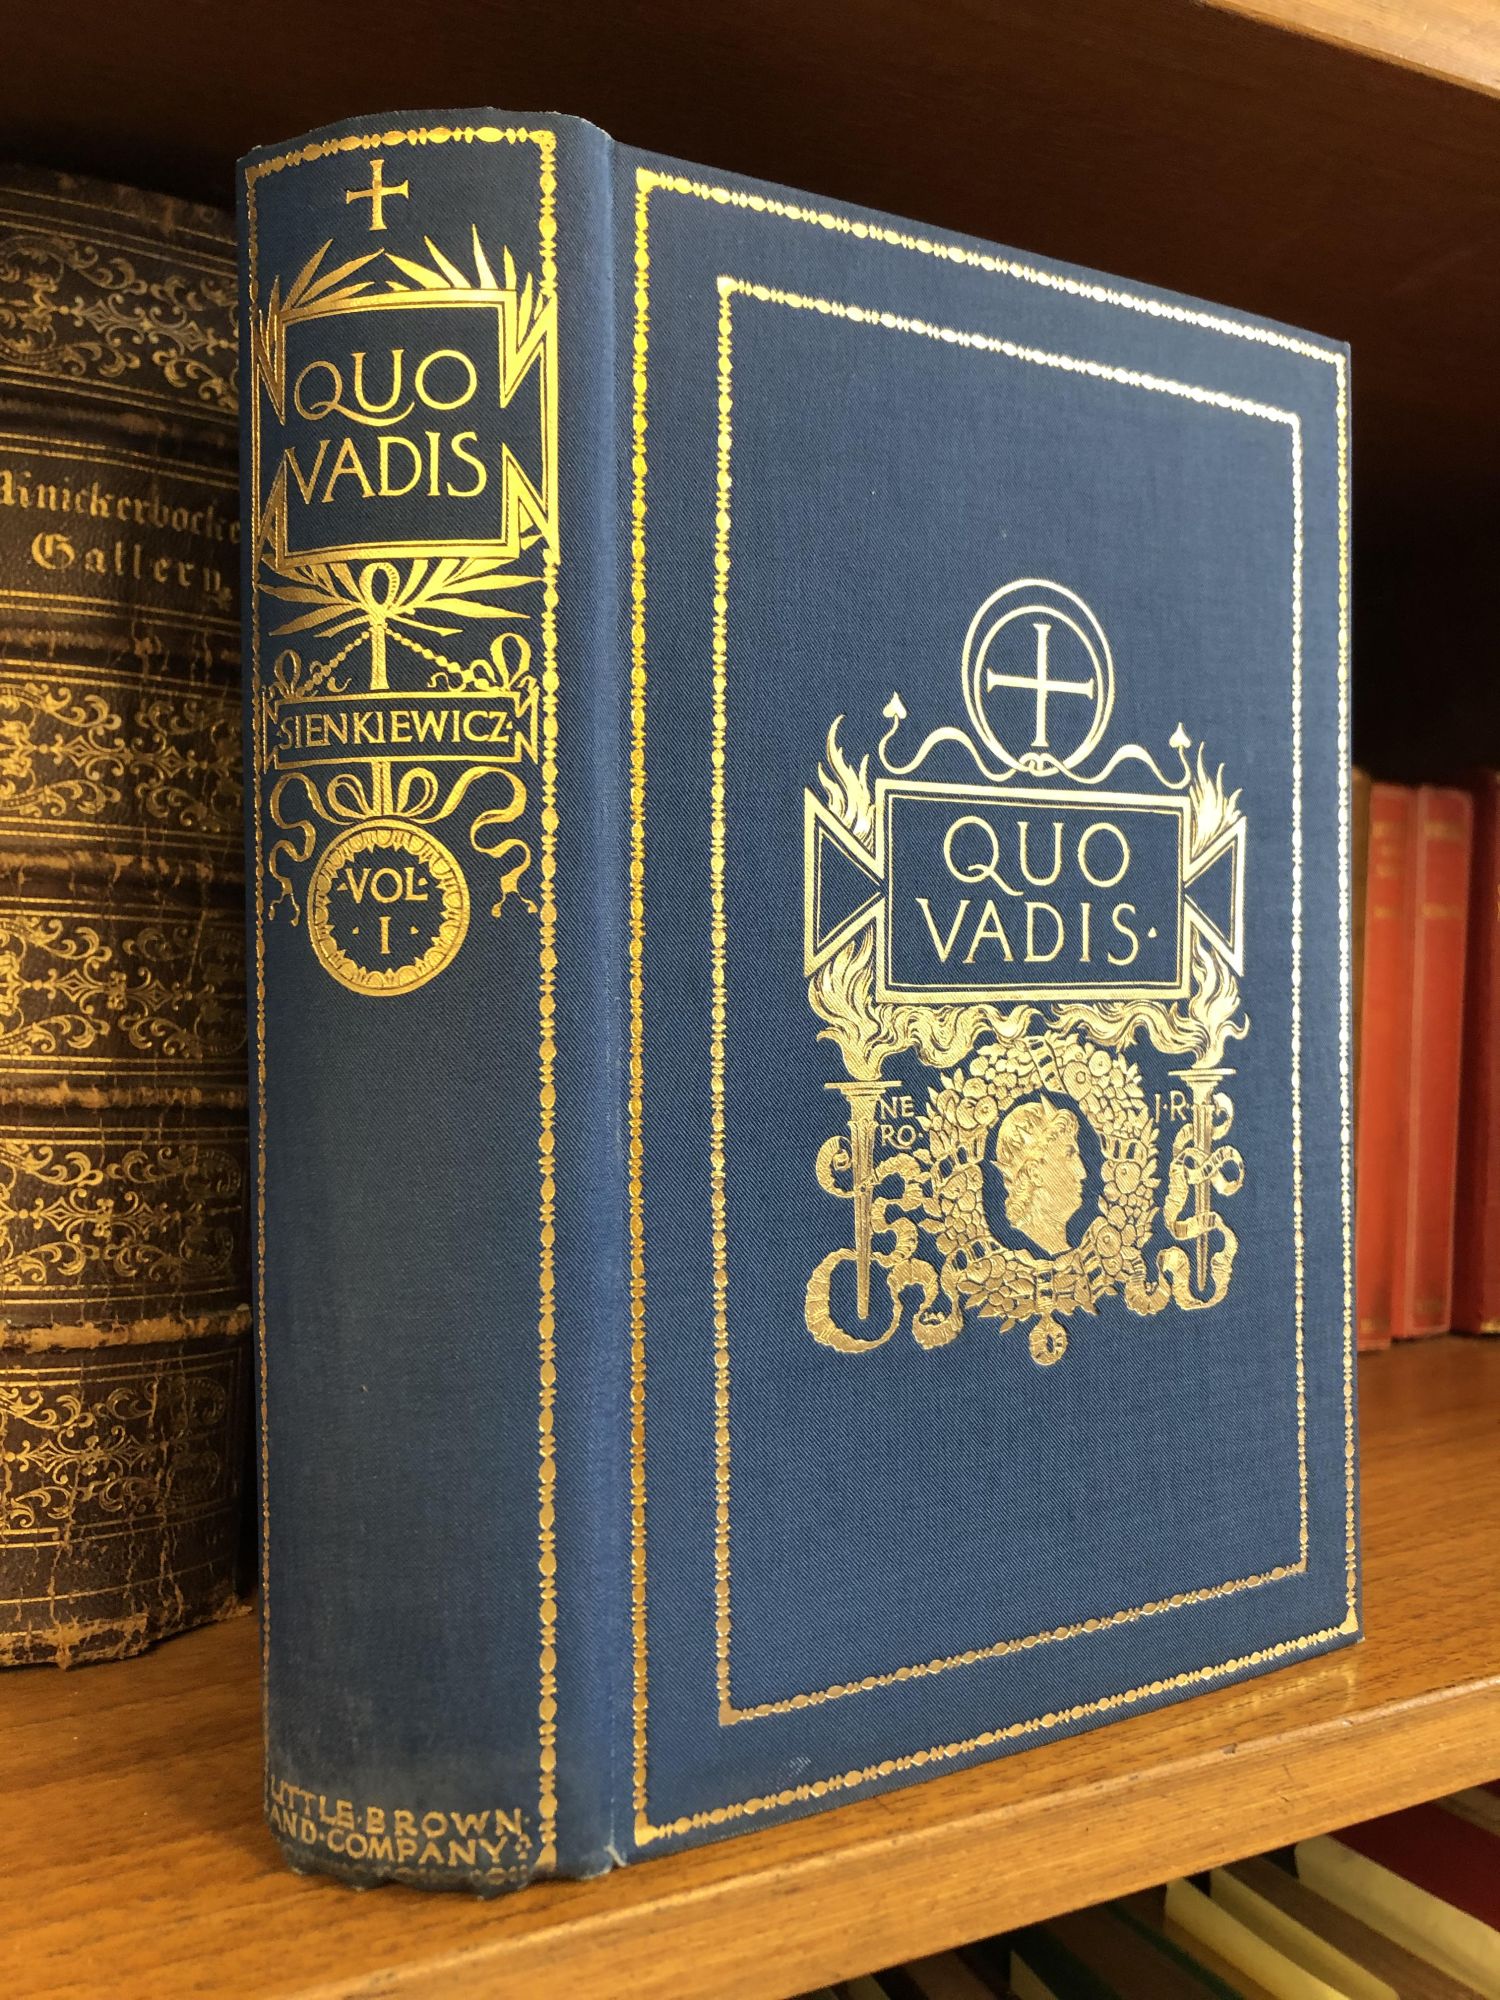 File:Quo vadis, a narrative of the time of Nero, by Henry K